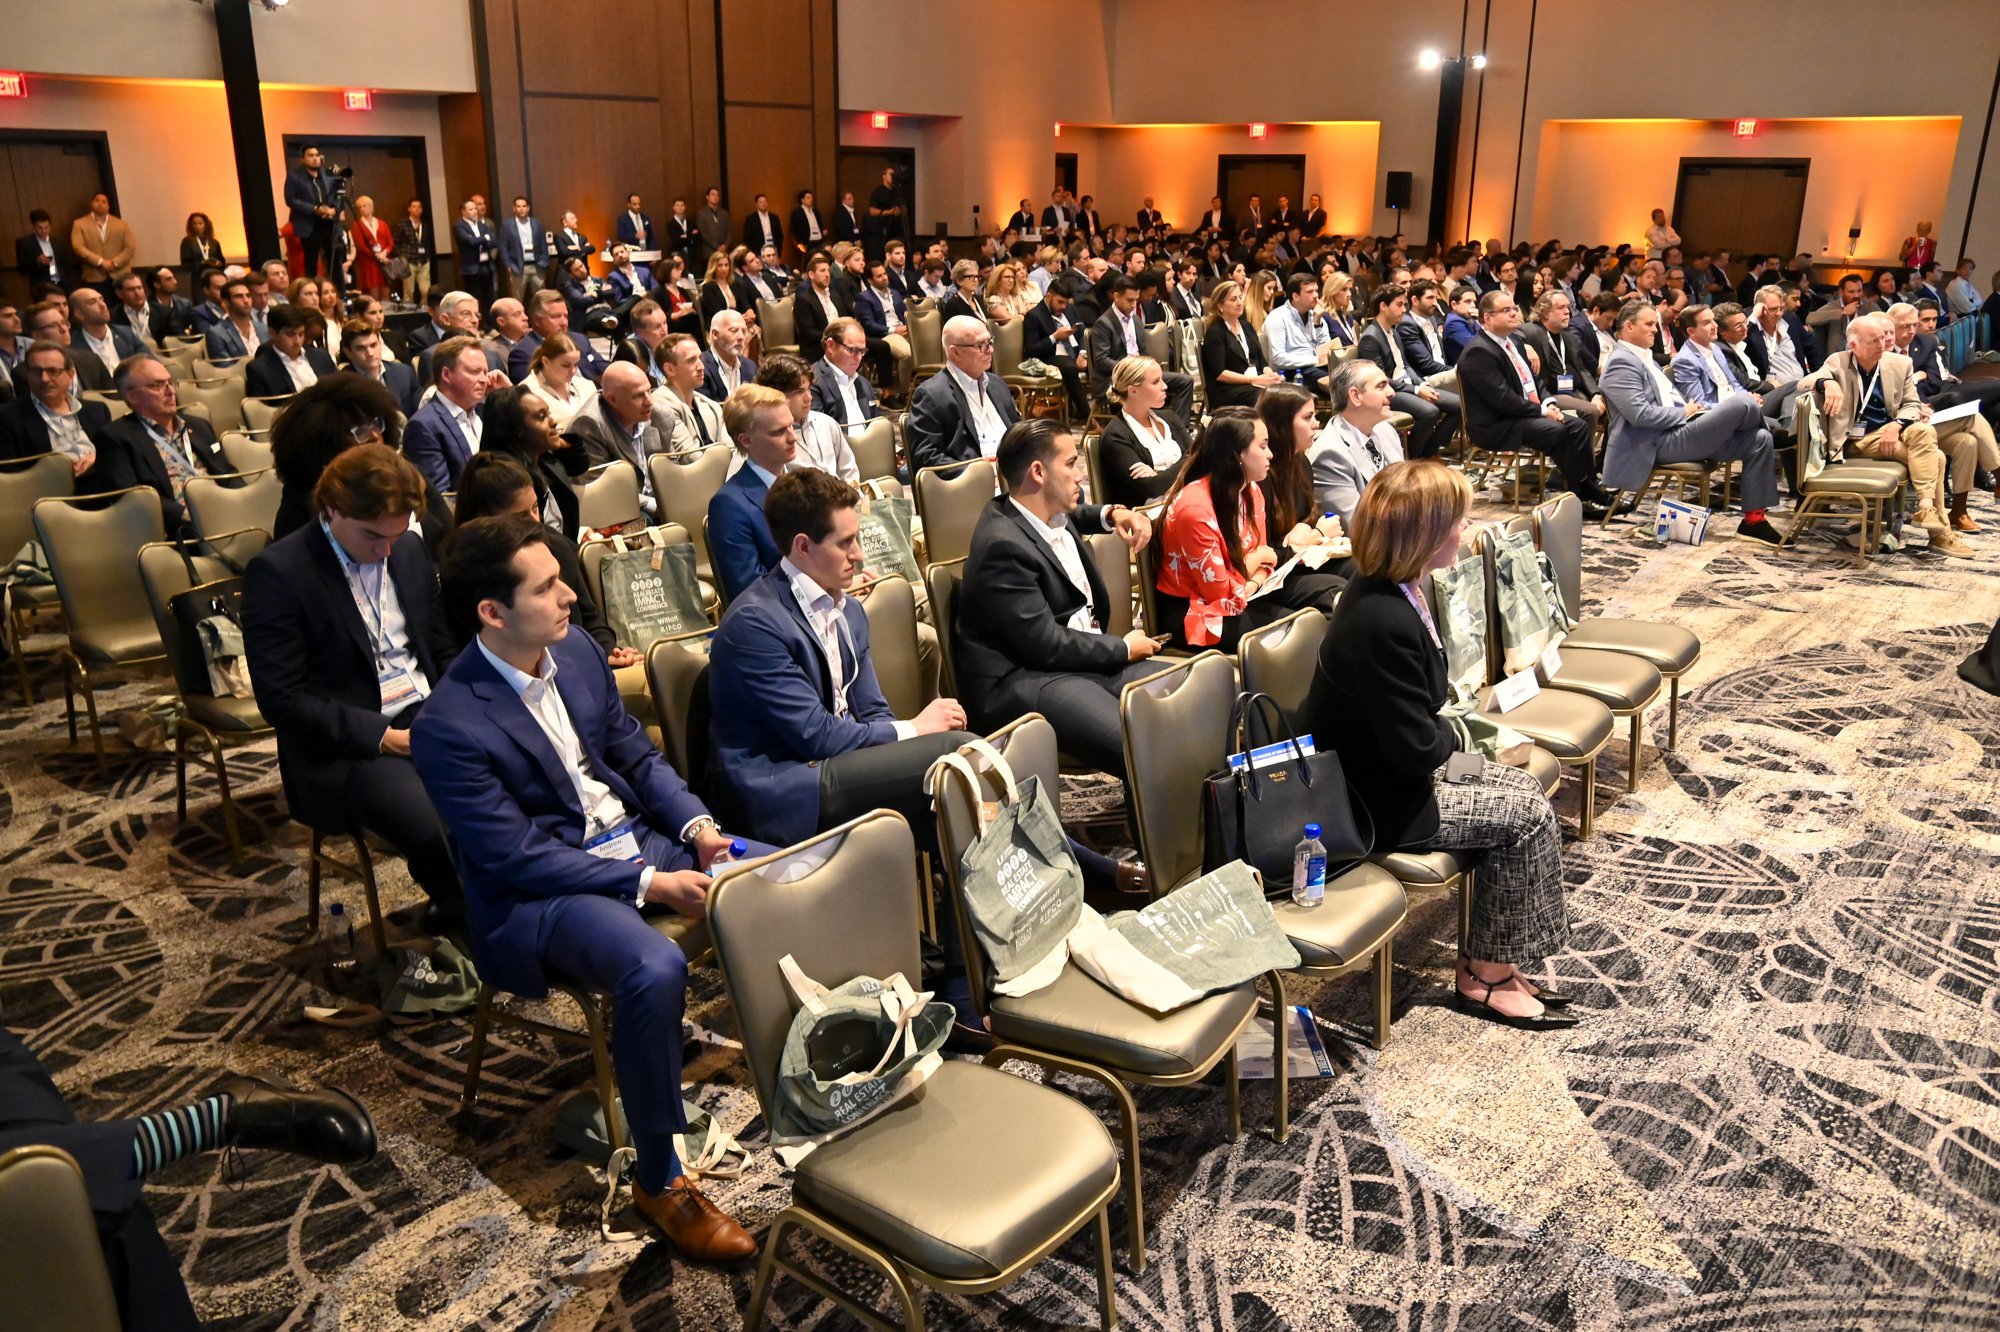 University of Miami Real Estate Impact Conference 2023 The Largest Edition Yet As Real Estate Leaders Discuss The State of Miami Real Estate 1,092.jpg